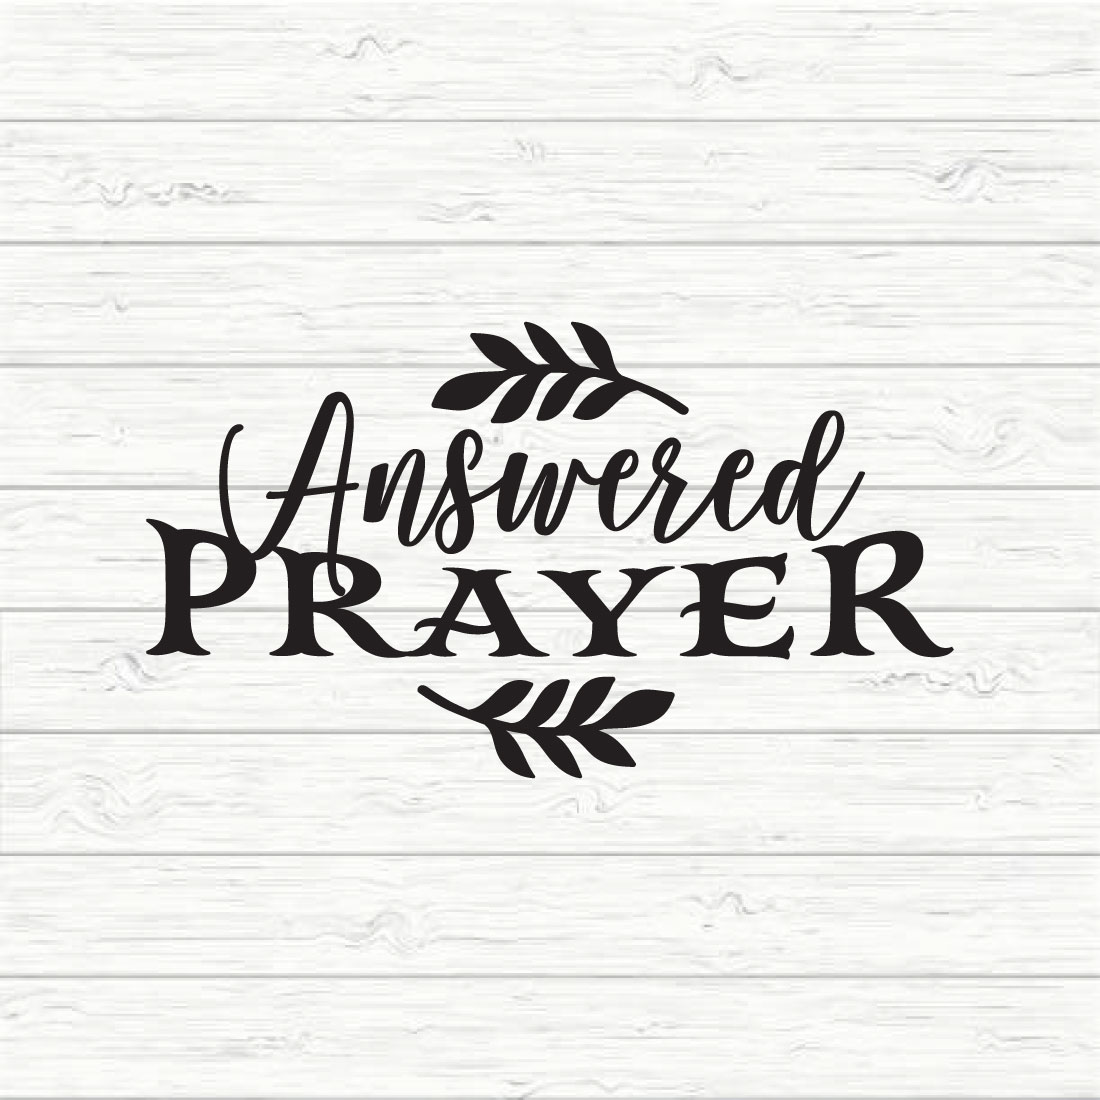 Answered Prayer preview image.